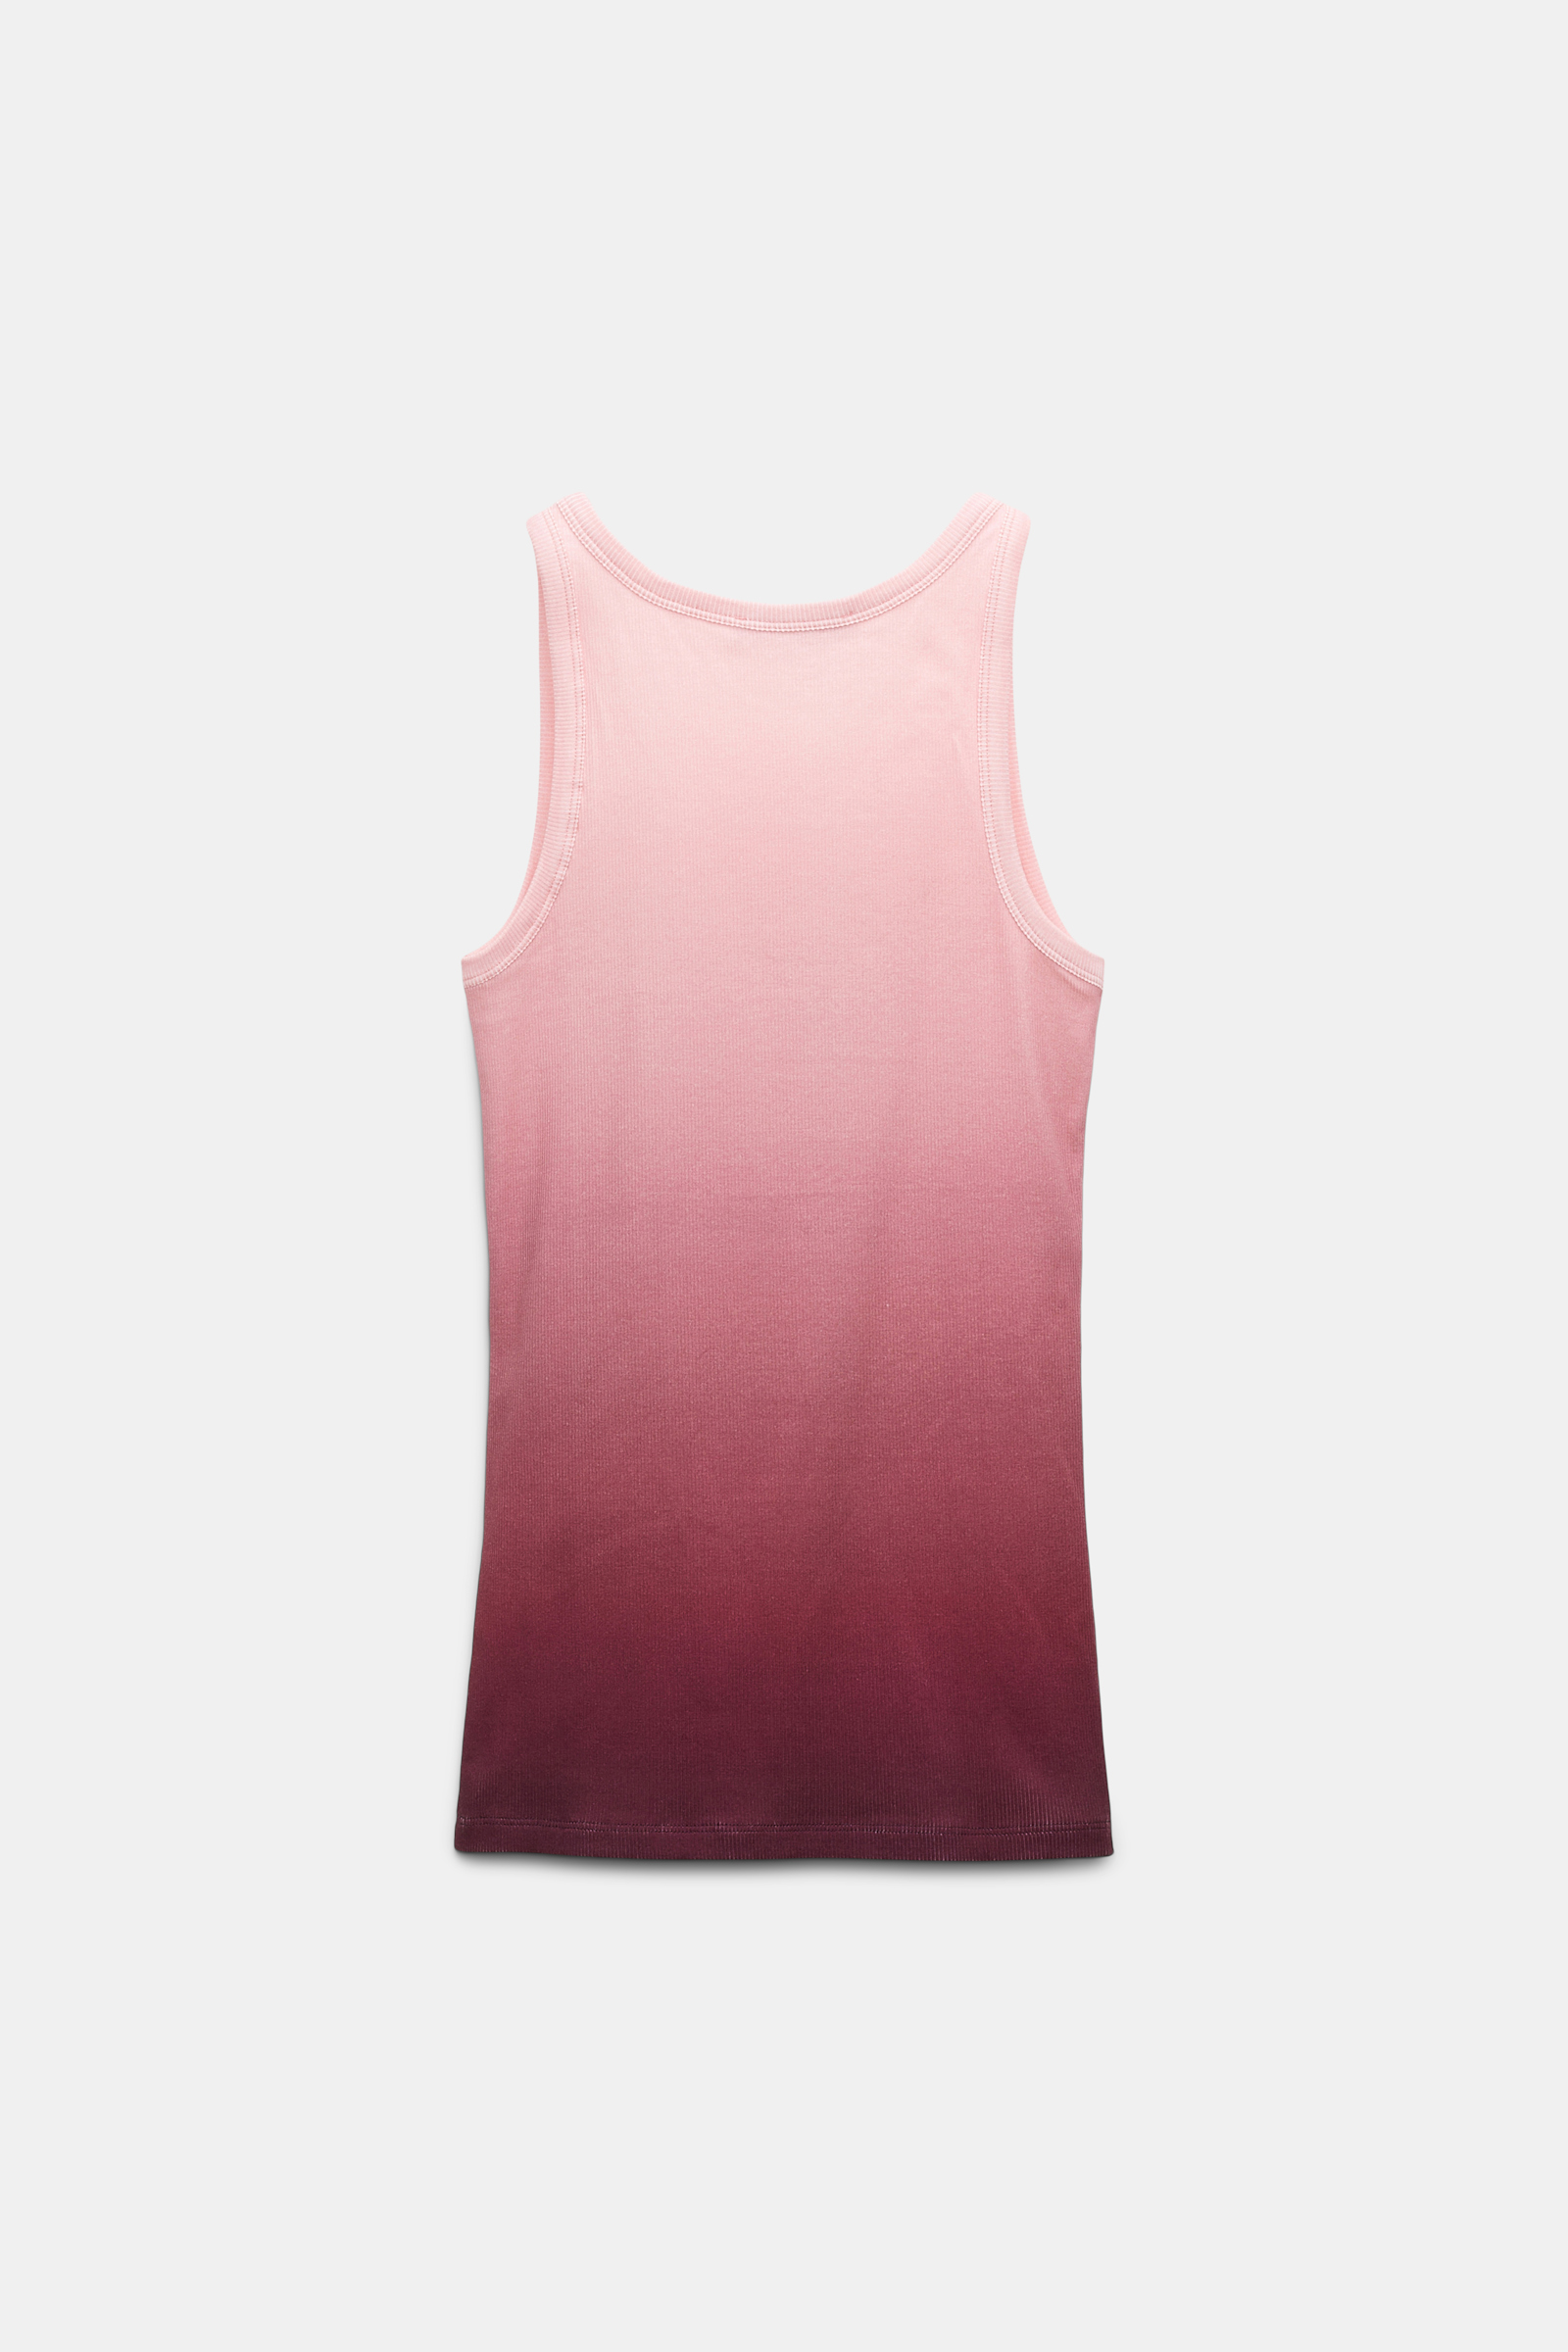 Dorothee Schumacher Color fade stretch cotton tank top with print pink white mix